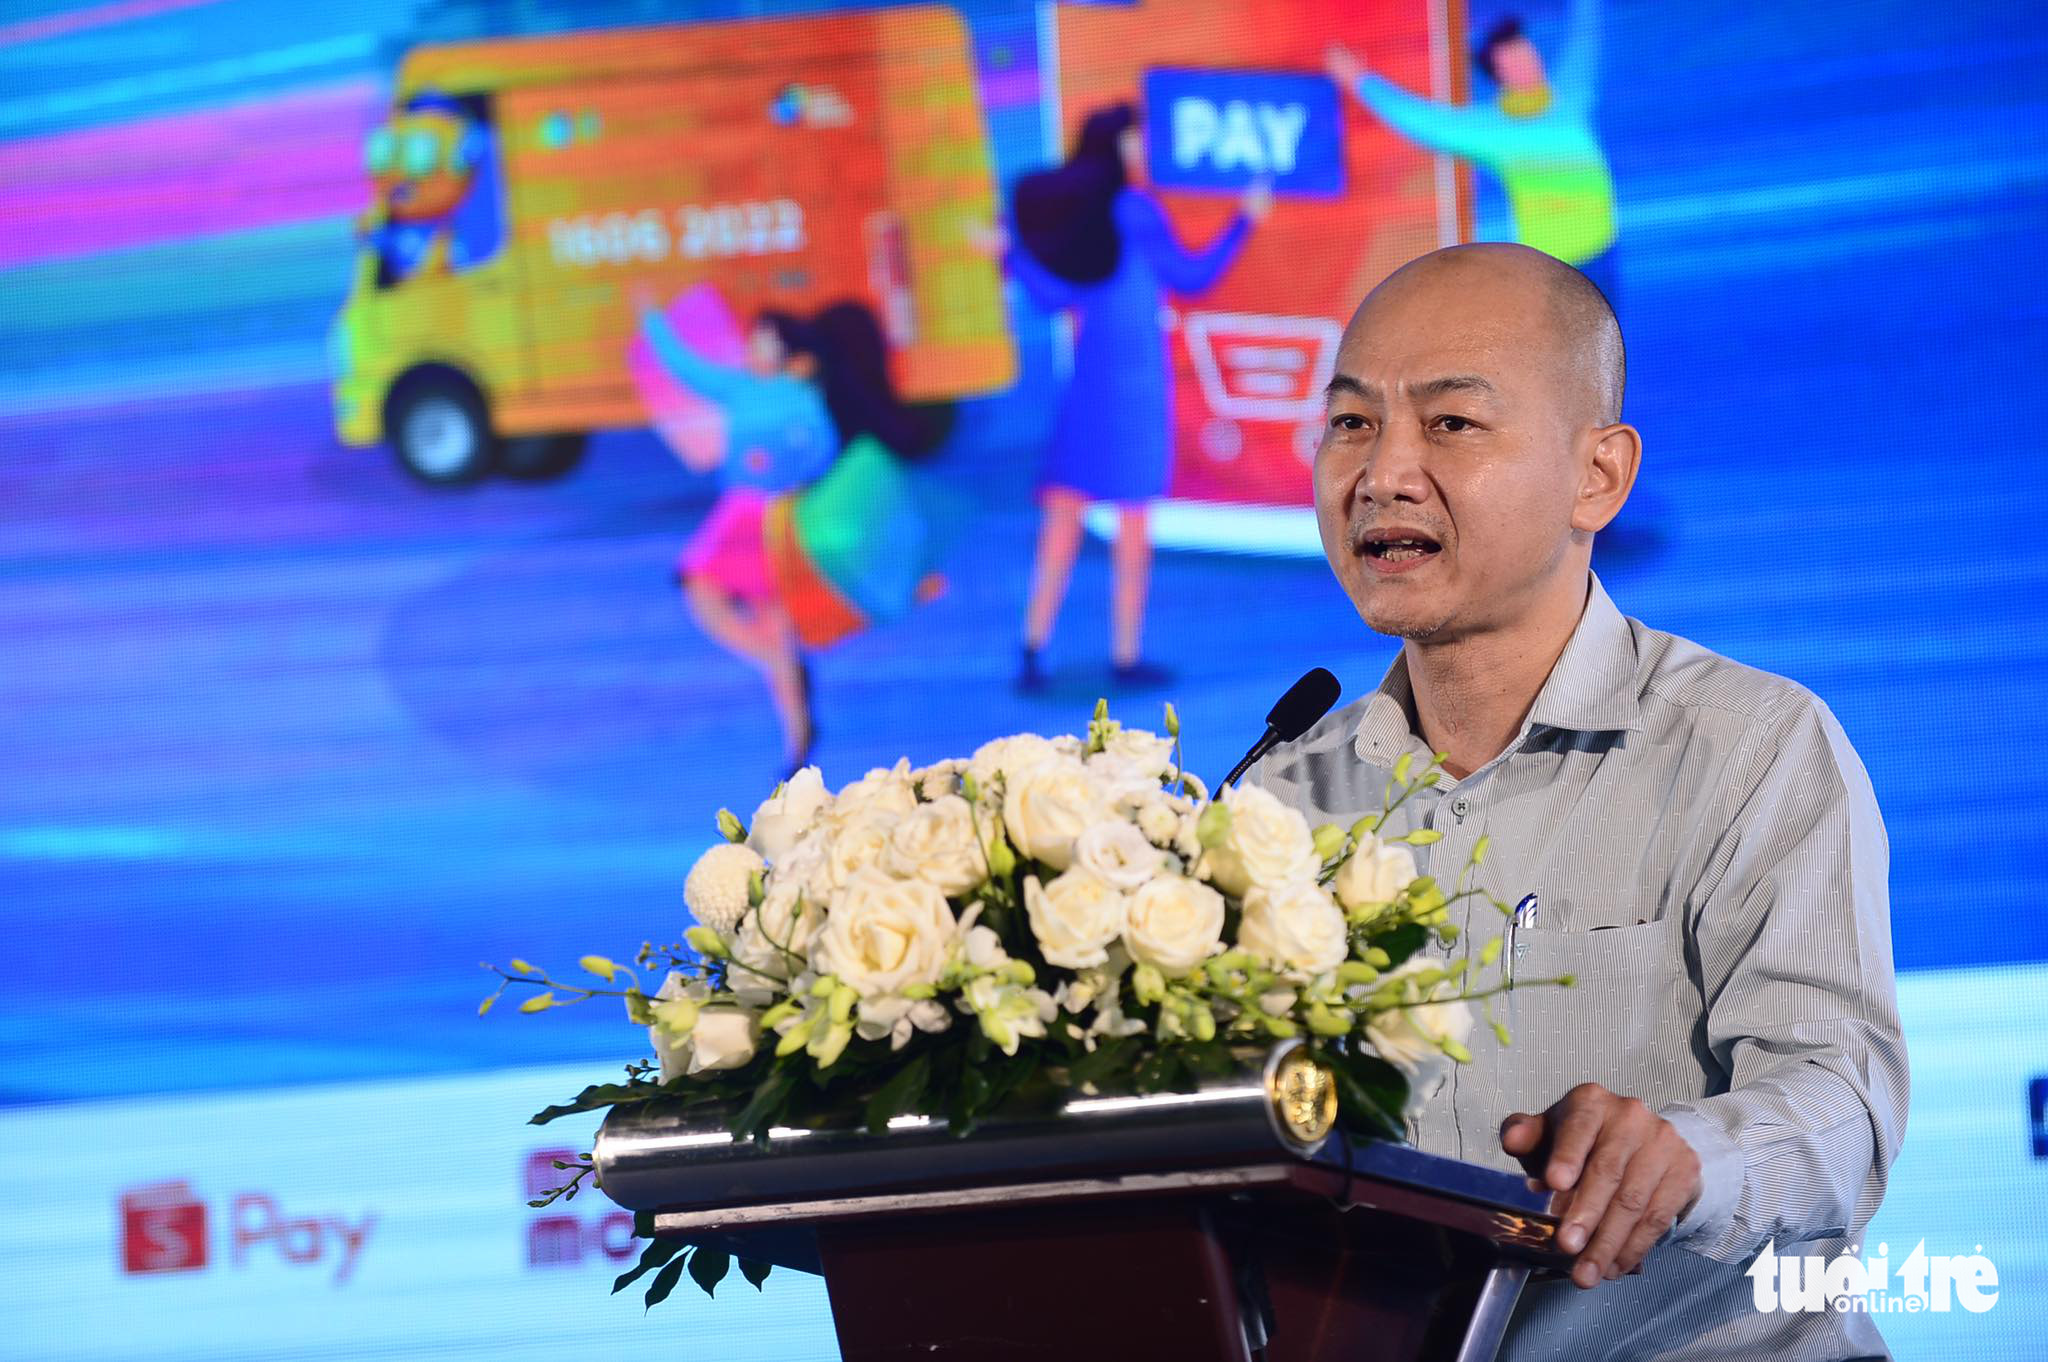 Nguyen Nguyen Phuong, deputy director of the Ho Chi Minh City Department of Industry and Trade, speaks at the Cashless Fair in Thu Duc City, Ho Chi Minh City, June 12, 2022. Photo: Quang Dinh / Tuoi Tre